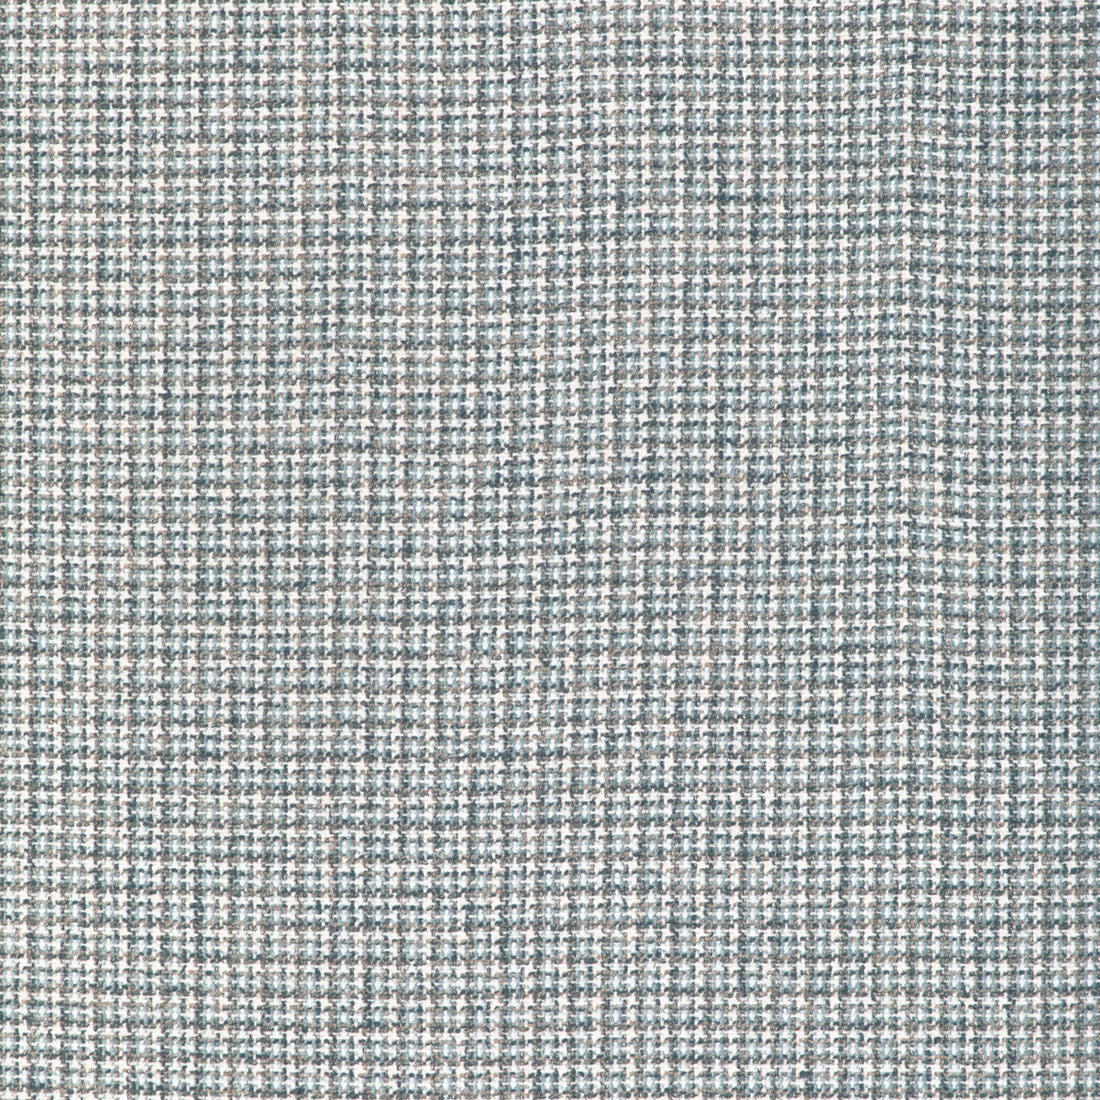 Aria Check fabric in grotto color - pattern 36950.13.0 - by Kravet Basics in the Mid-Century Modern collection